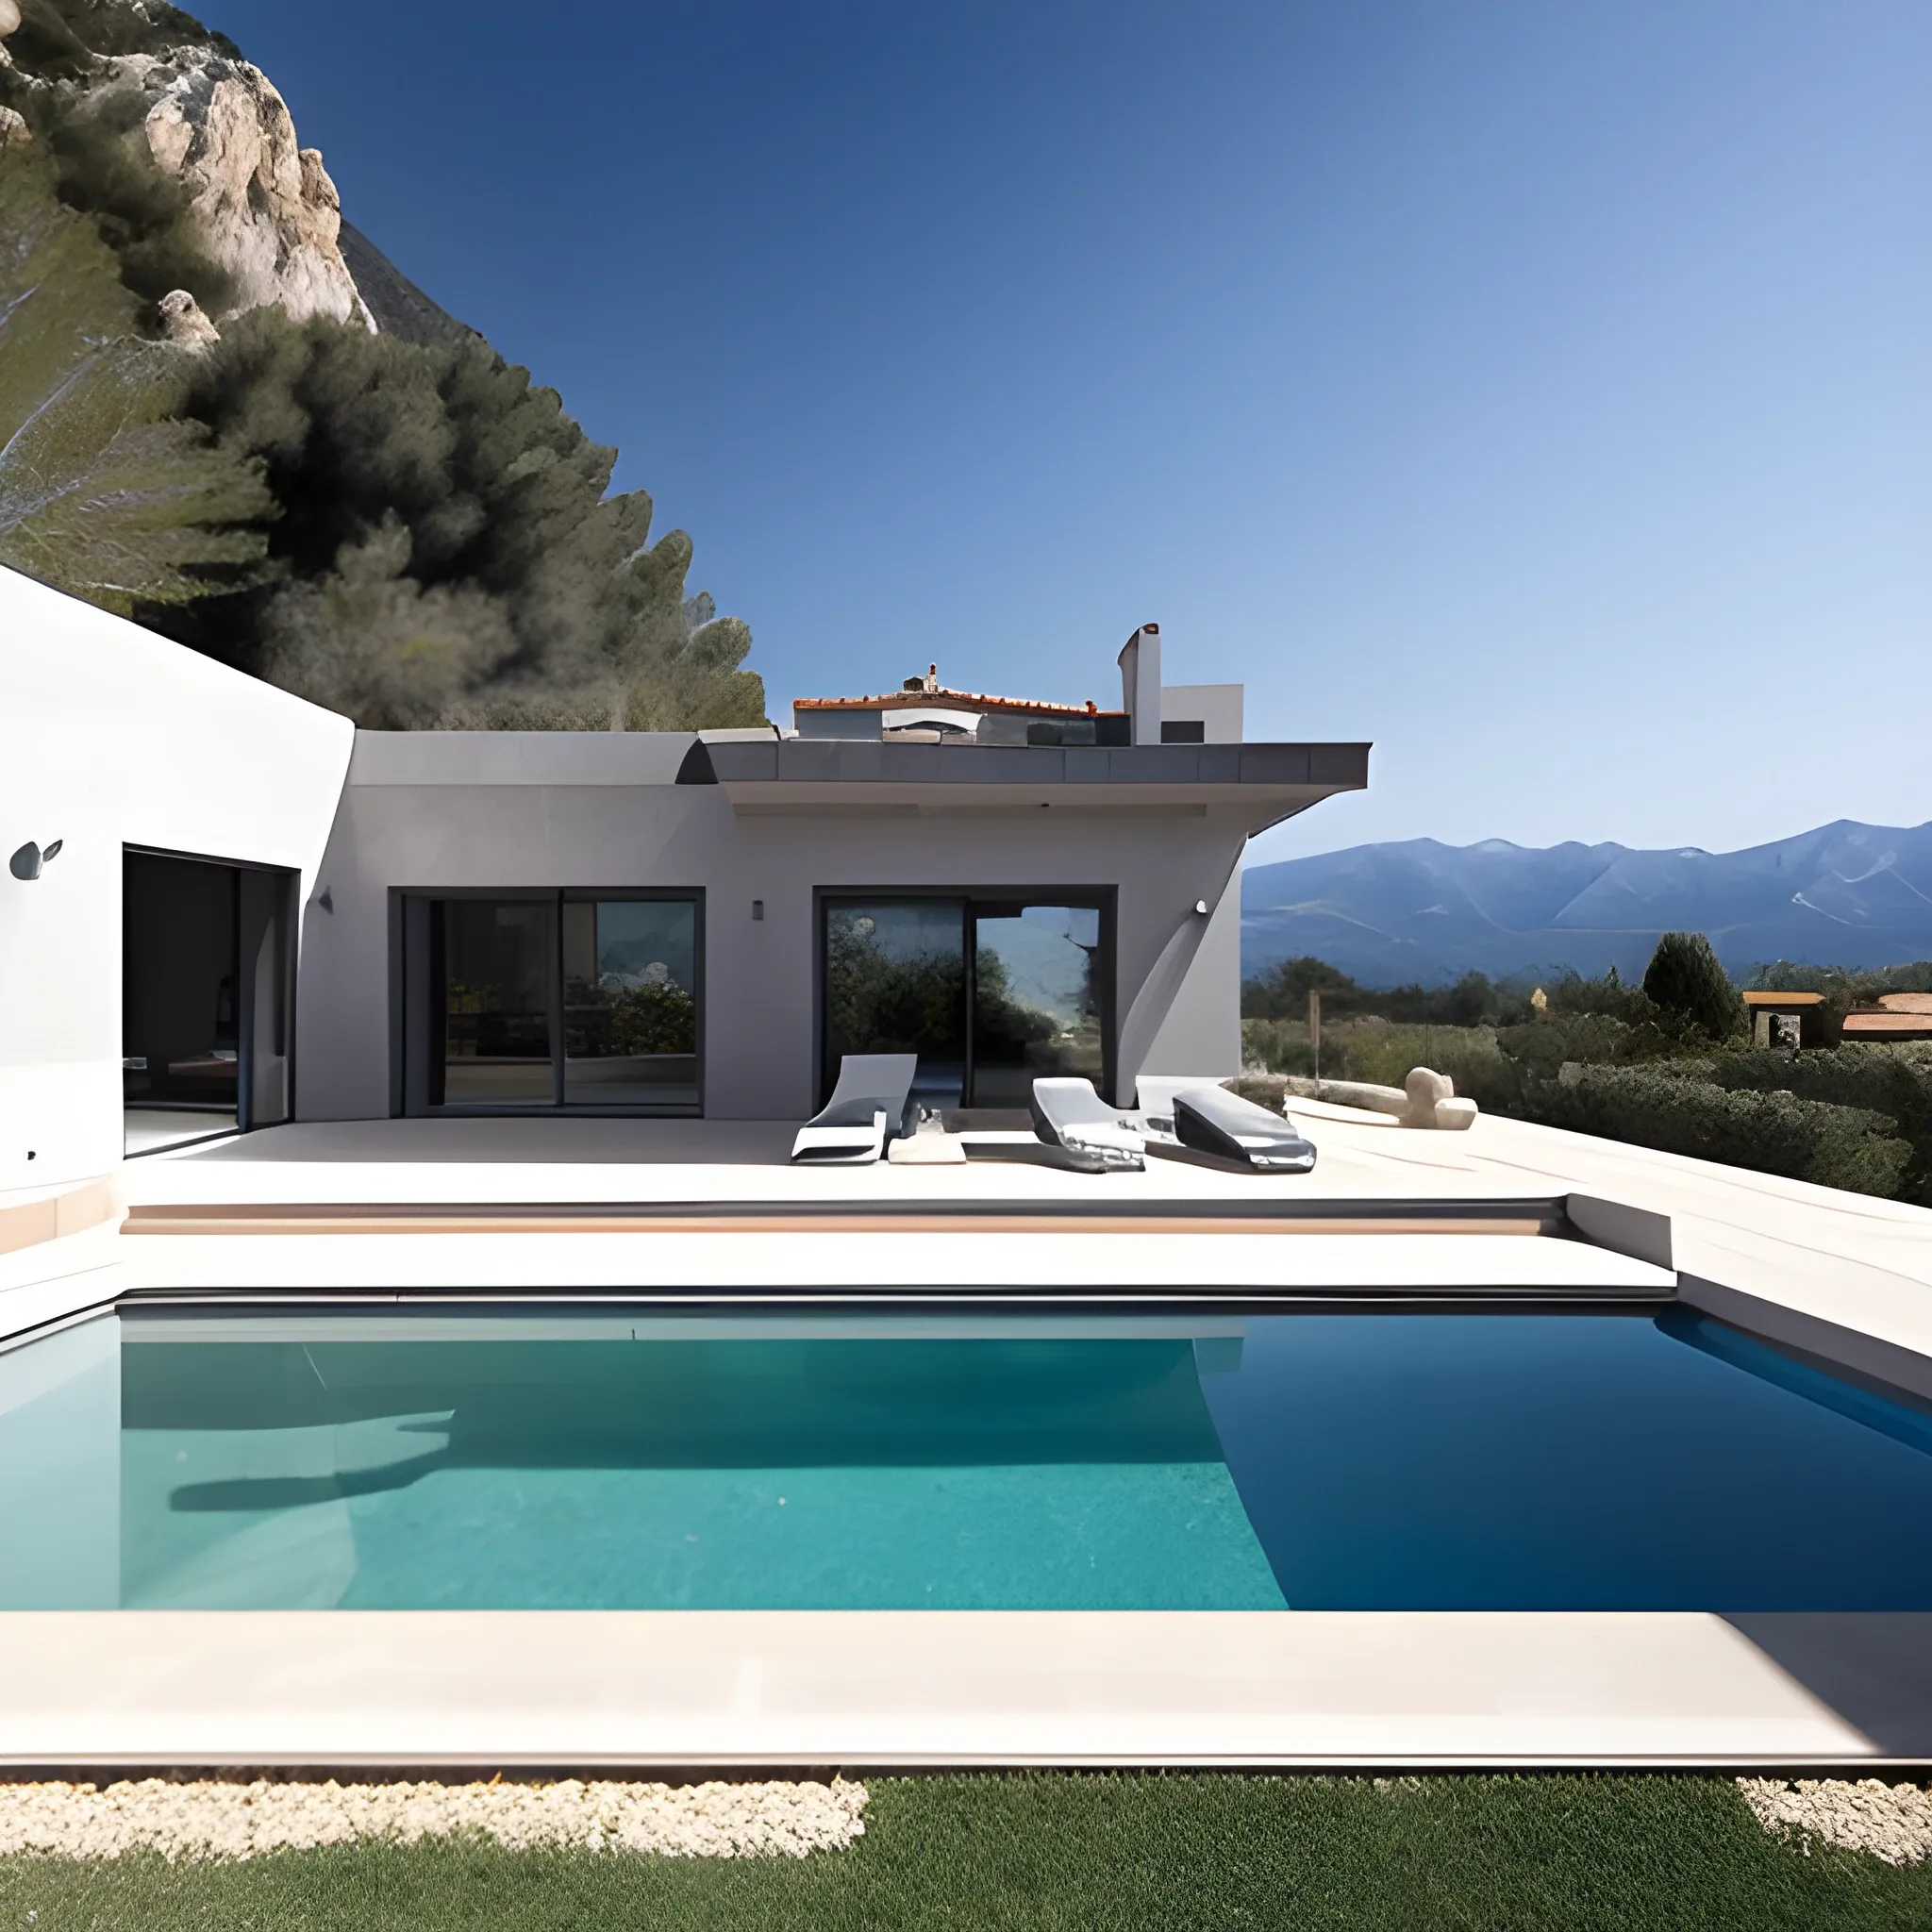 A one story modern villa in dark grey with infinity pool overlooking the mount canigou. A palm tre on the right side of the pool. 
